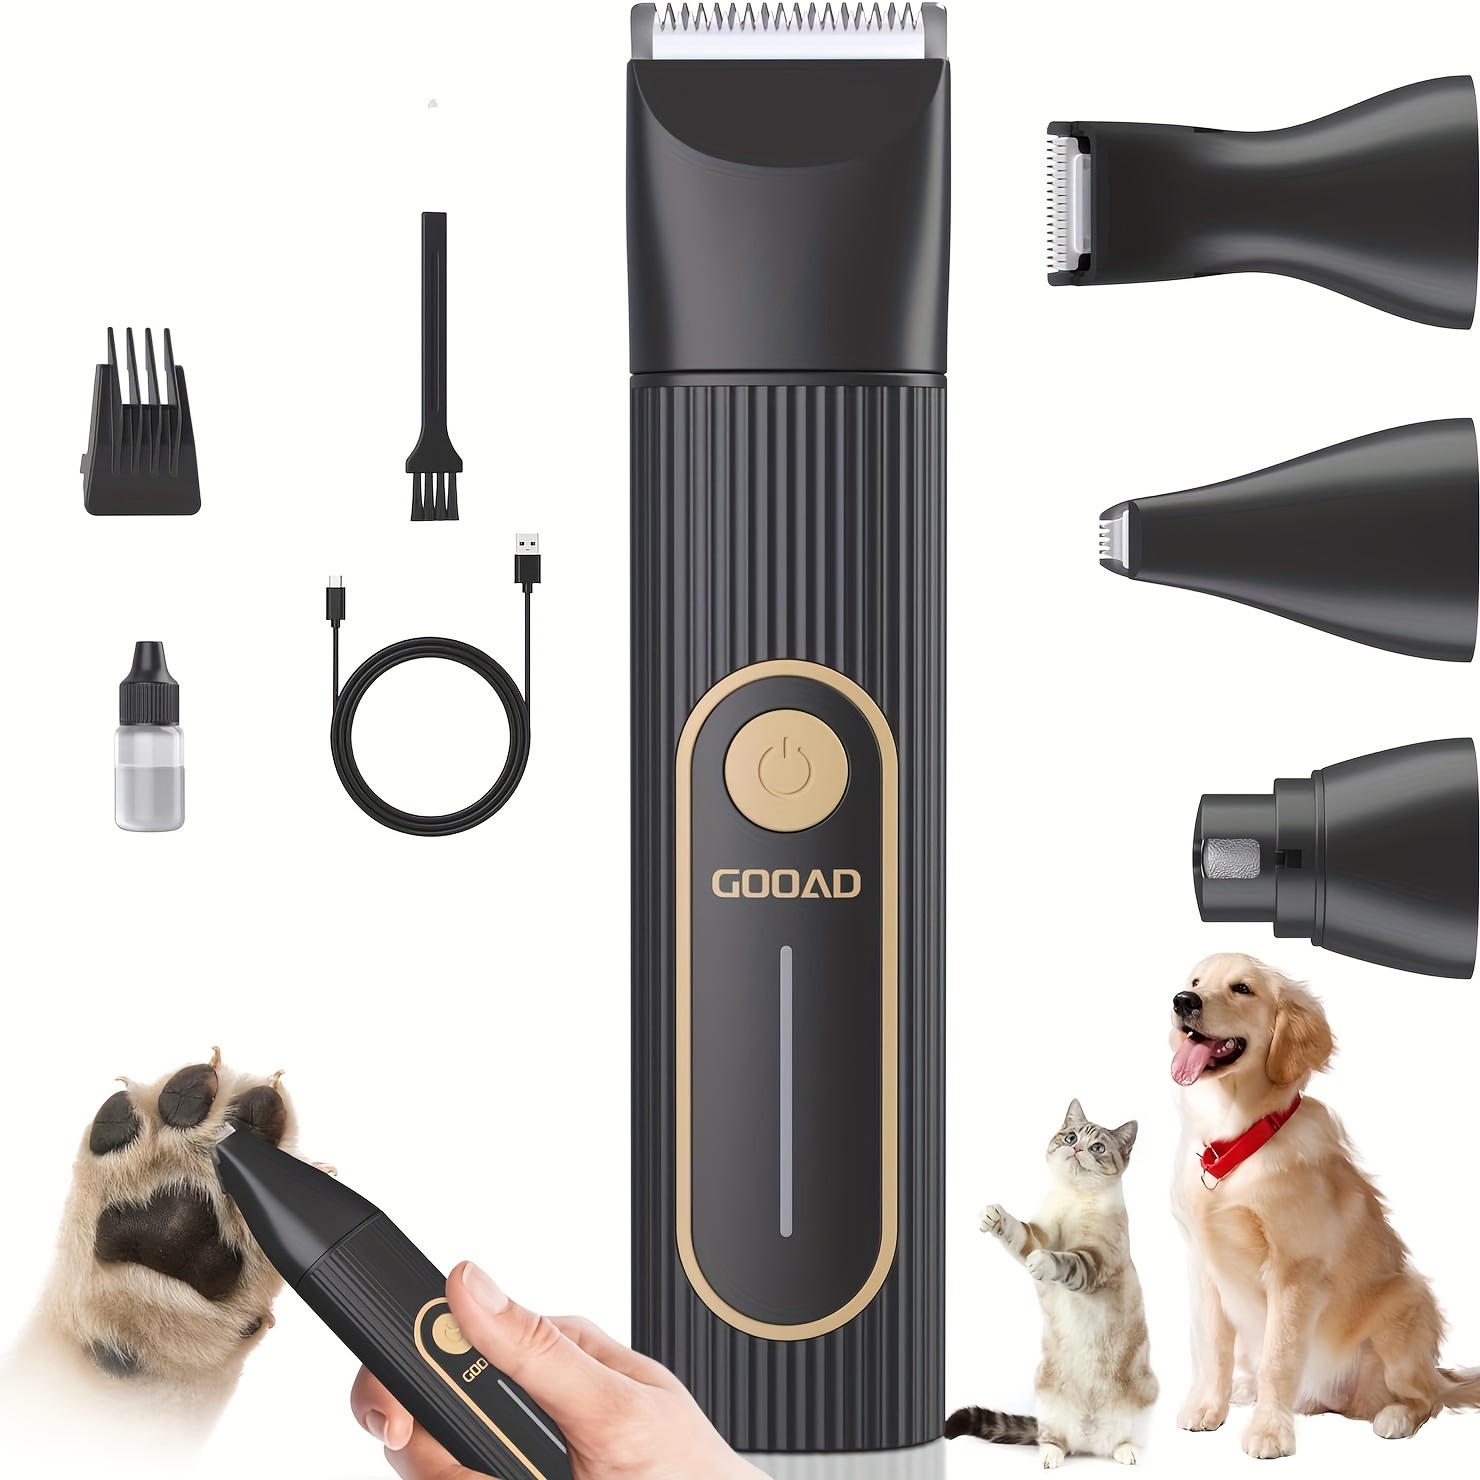 

Gooad Dog Clipper Grooming Kit - Low Noise - Cordless Quiet Paw Trimmer Nail Grinder Pet Hair Shaver For Small And Large Dogs Cats Dog Hair Trimmer Also For Pet Hair Around Paws Eyes Ears Face Rump